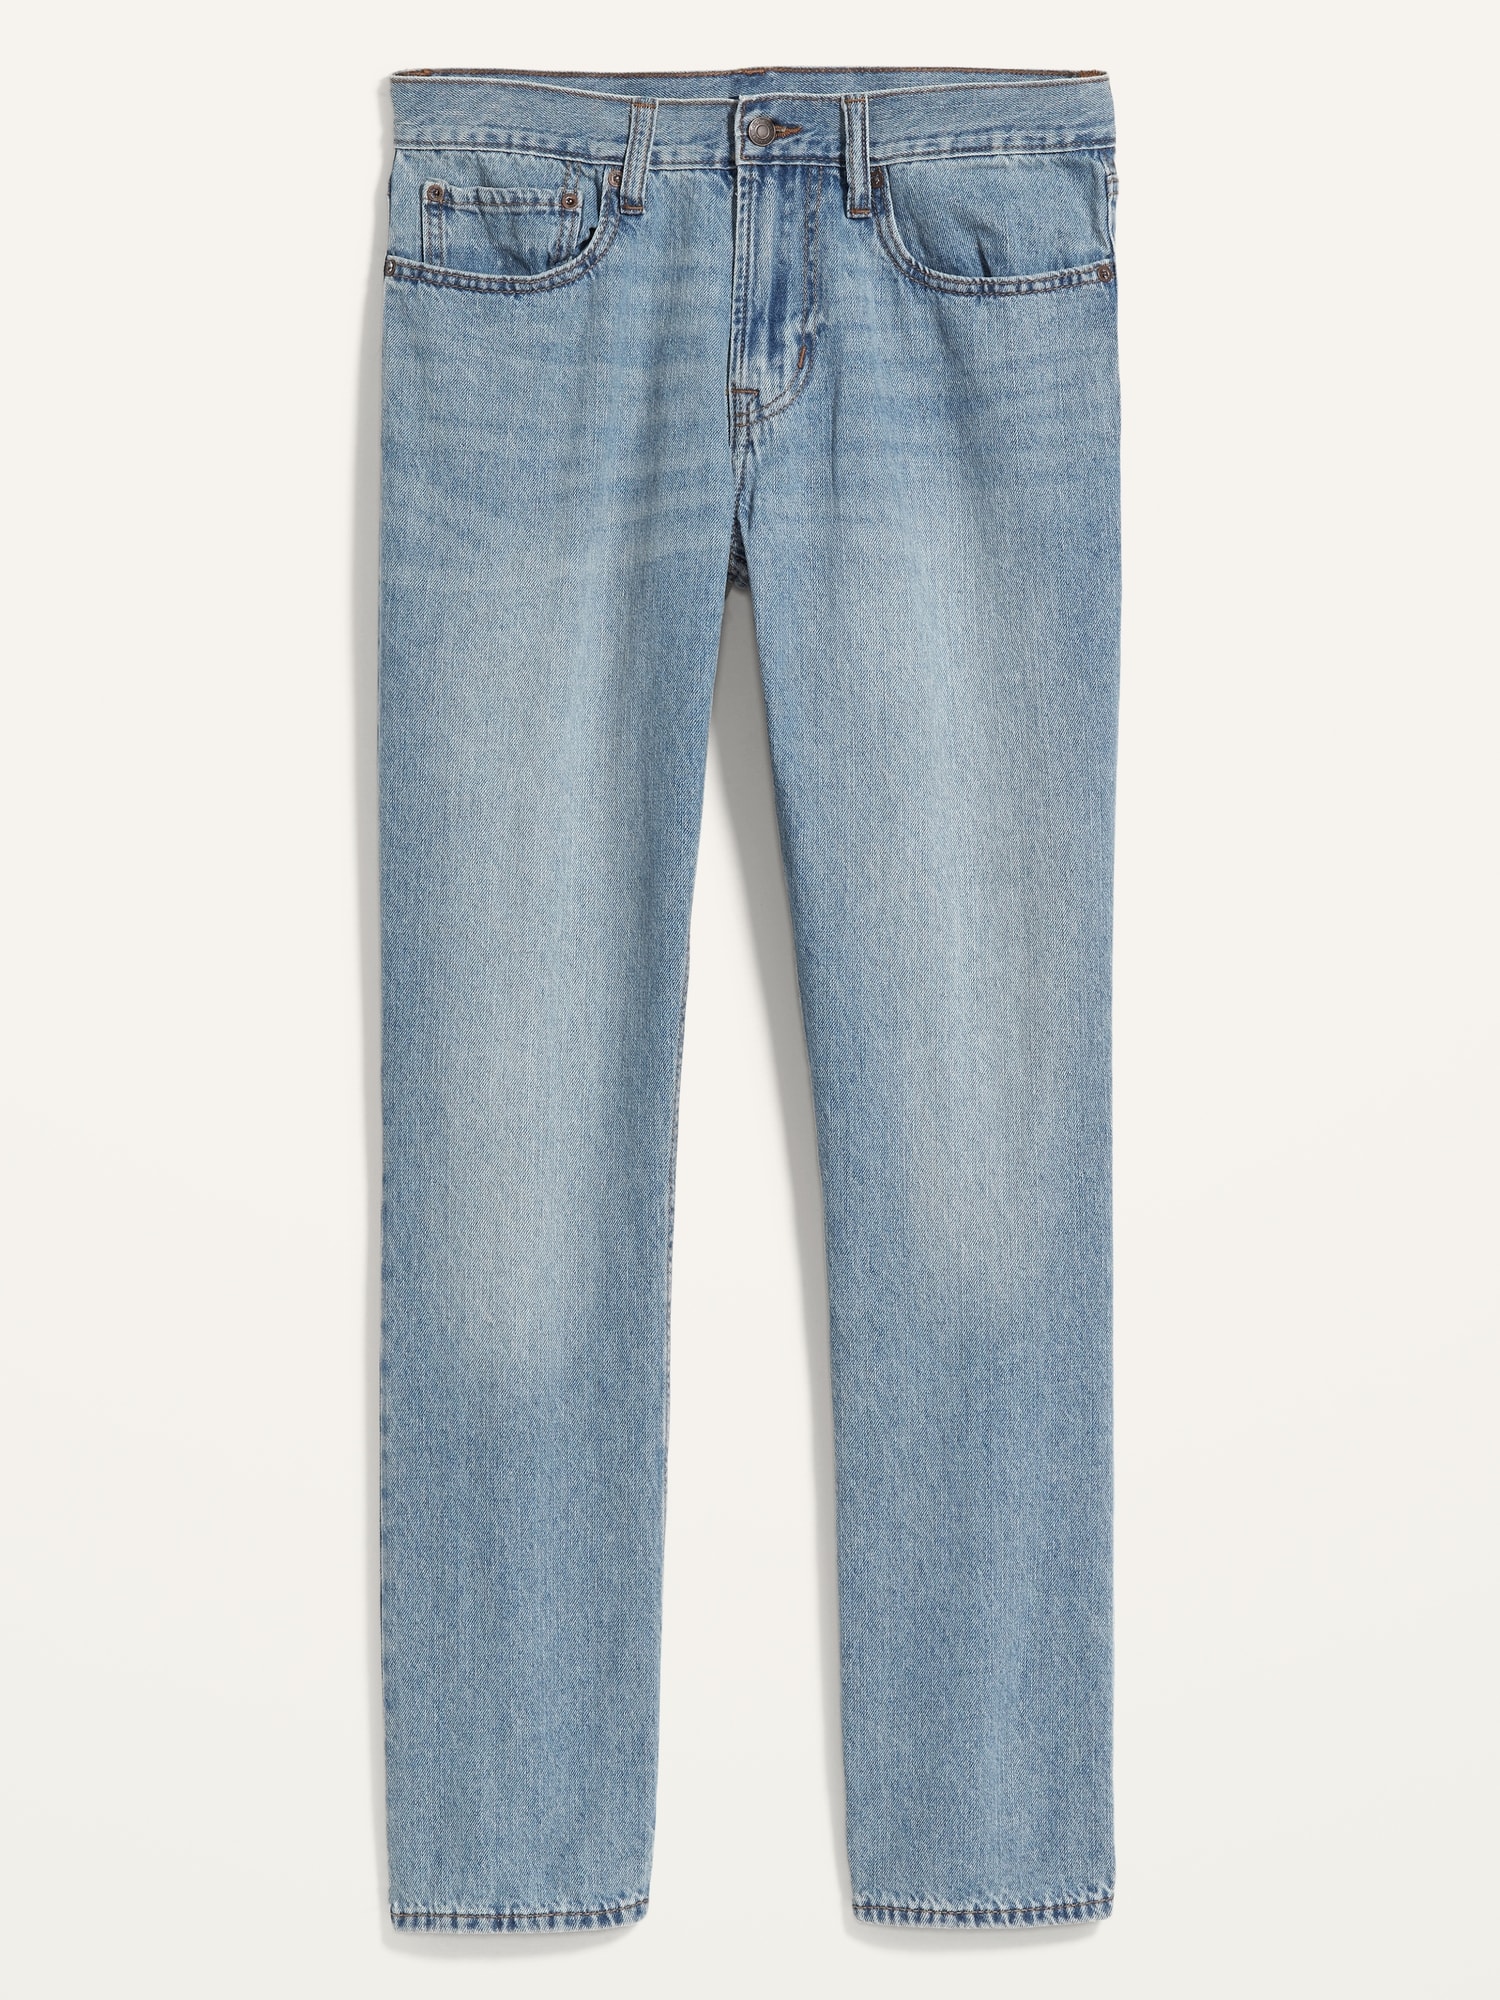 Wow Straight Non-Stretch Jeans for Old Navy